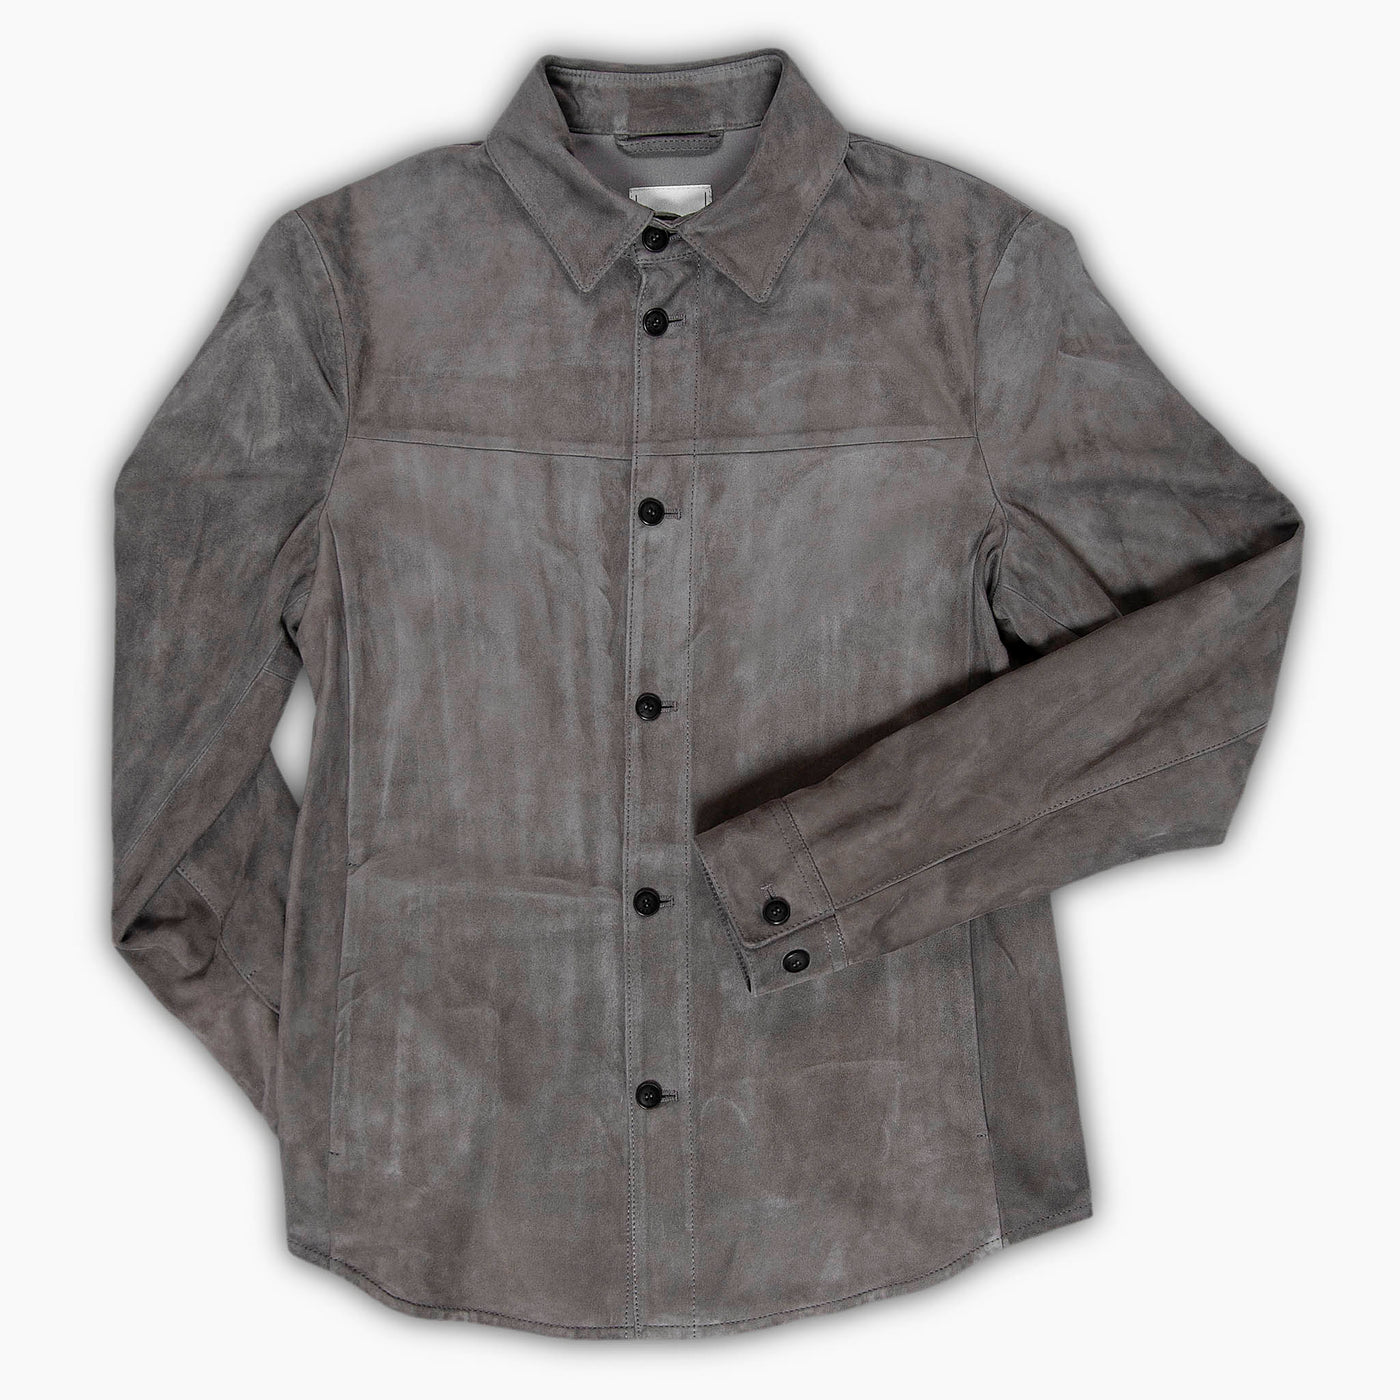 Lazare shirt leather jacket(suede)